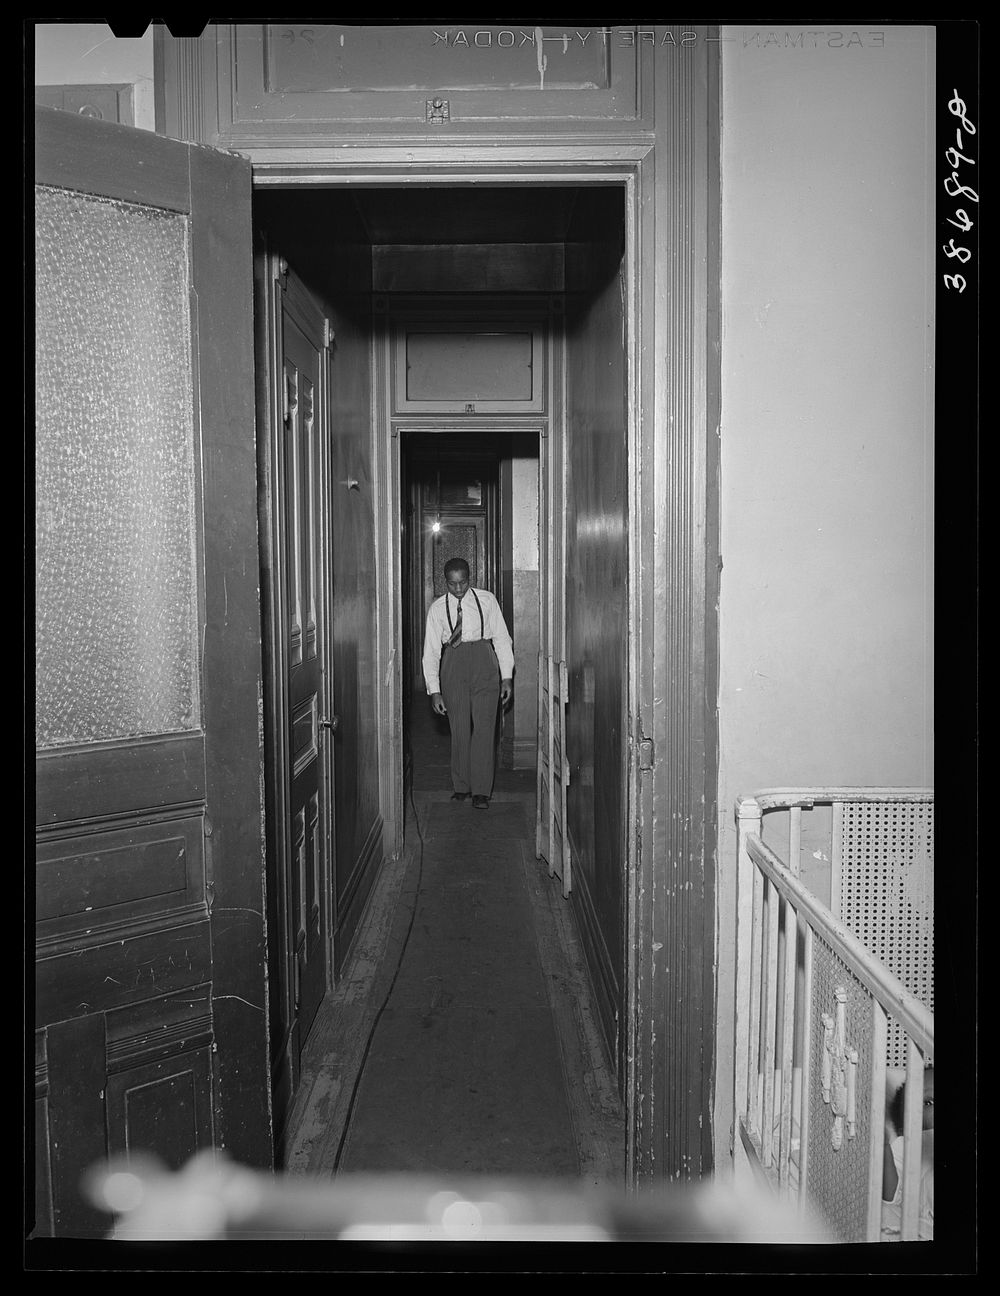 [Untitled photo, possibly related to: Hall leading to apartment of  railroad worker. Chicago, Illinois] by Russell Lee